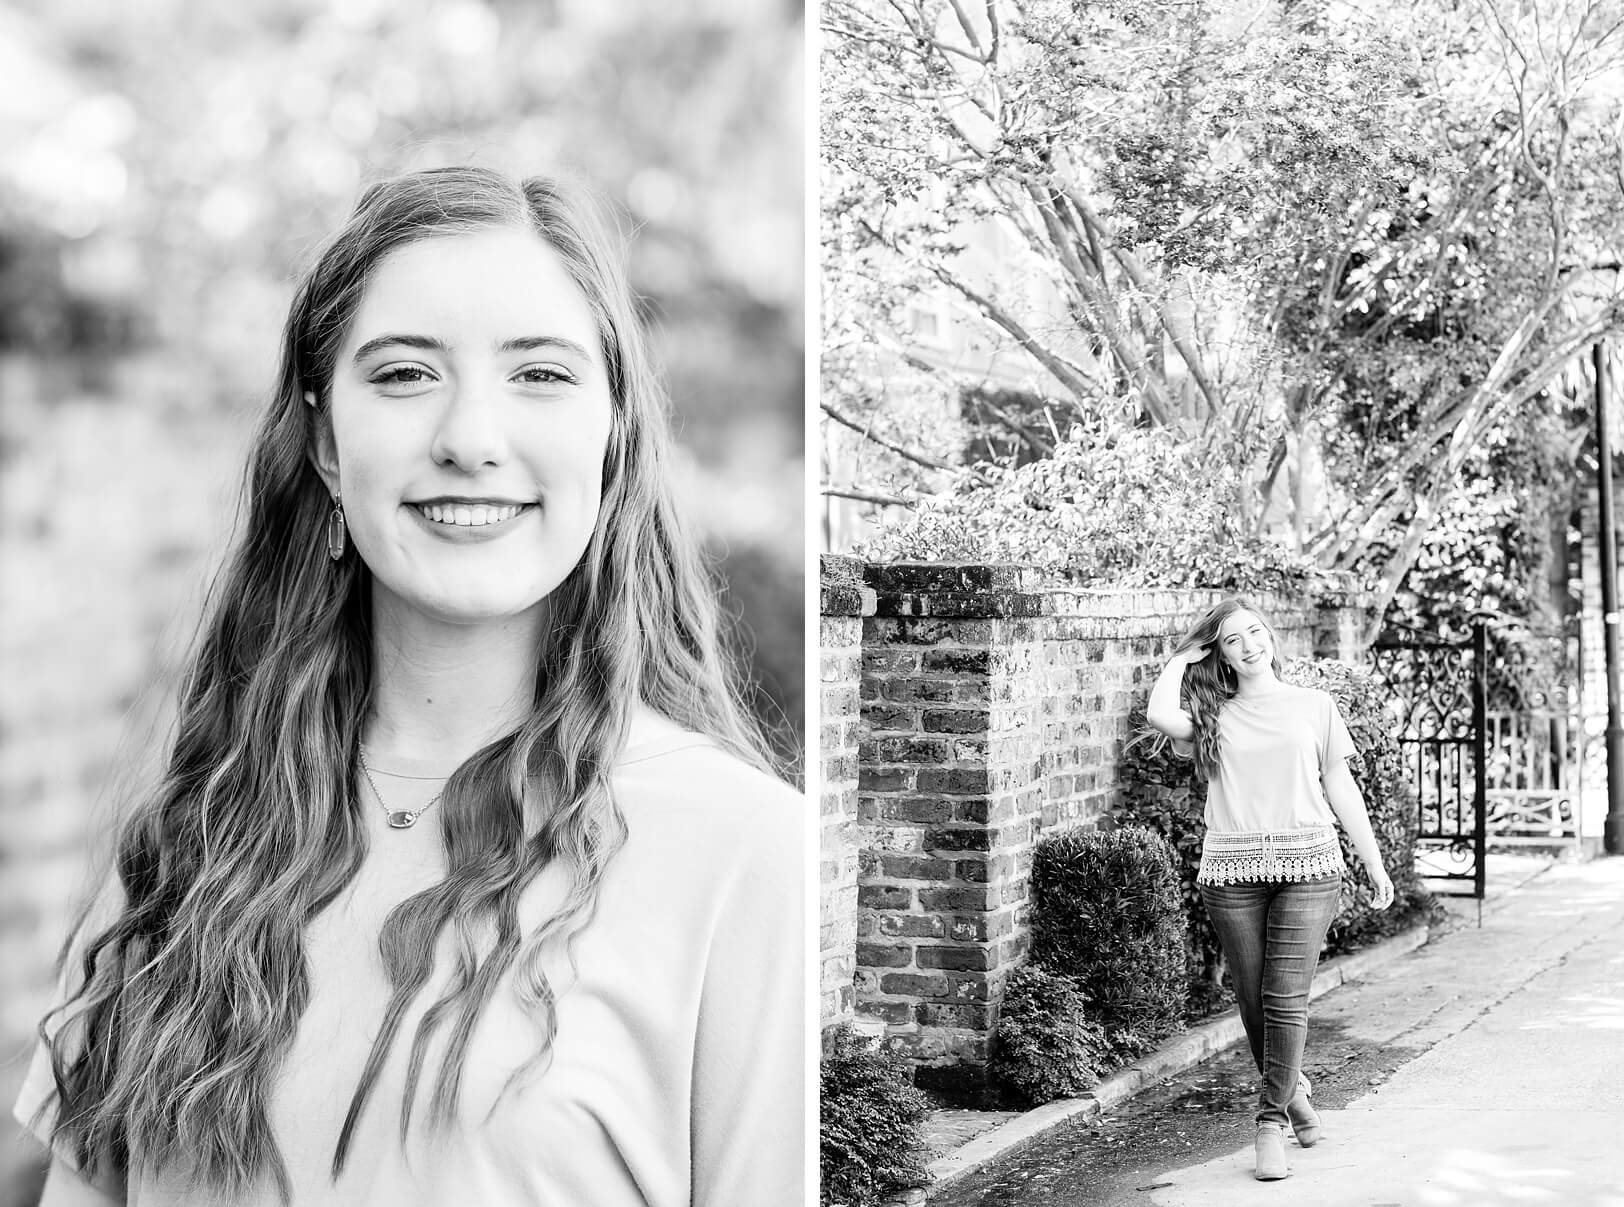 Black and white portrait photography in the Lowcountry